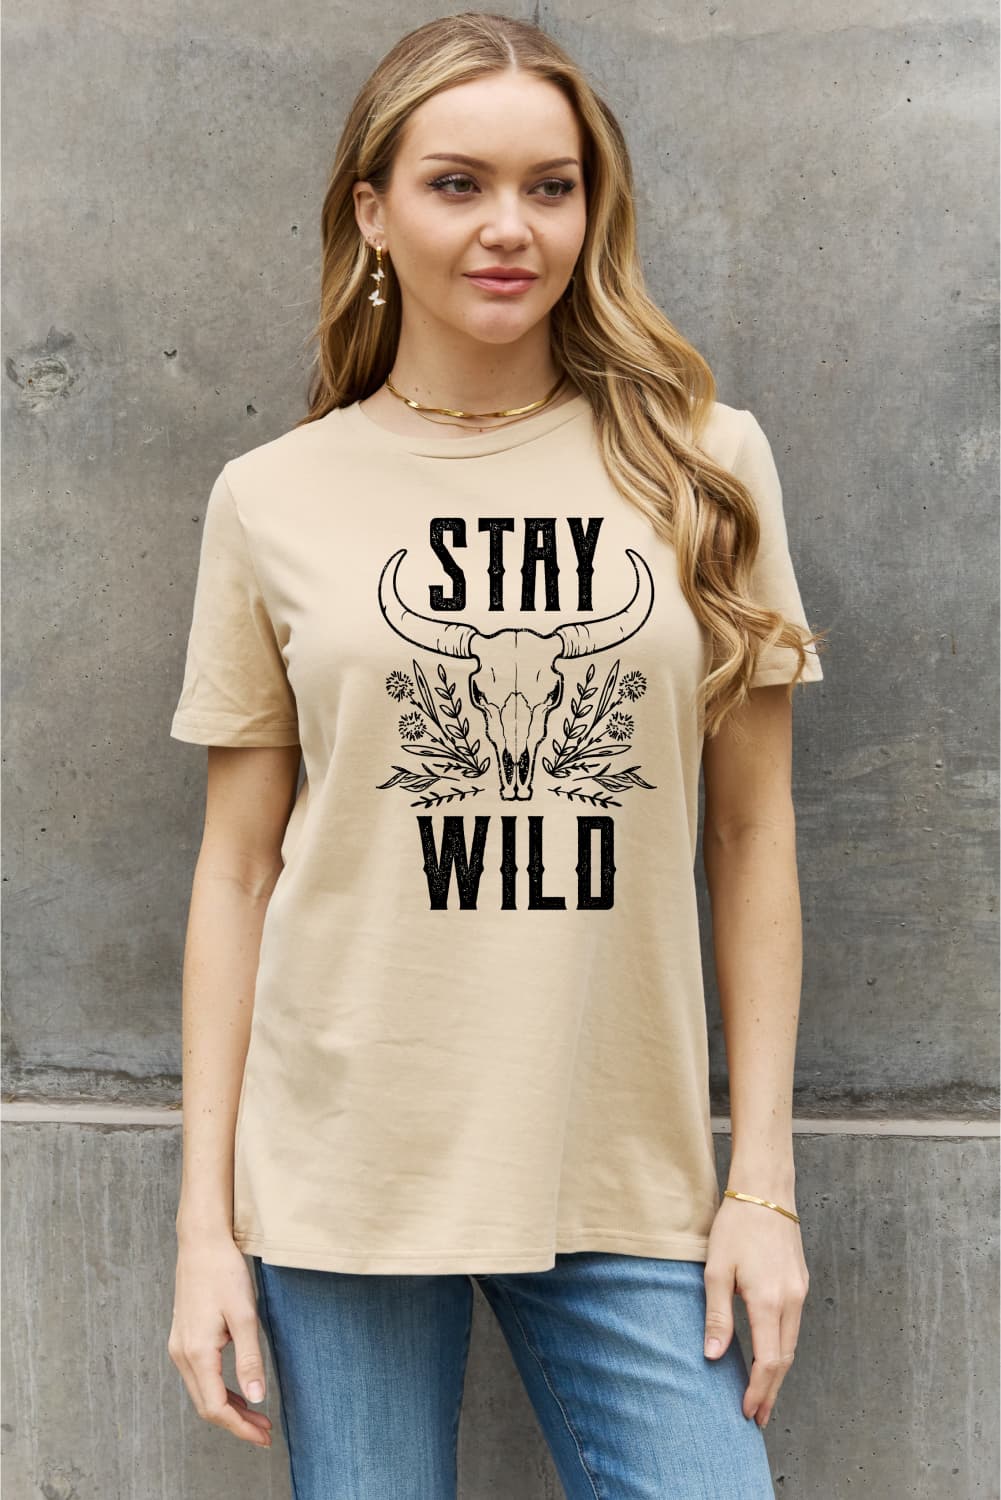 Light Slate Gray Simply Love Full Size STAY WILD Graphic Cotton Tee Tops